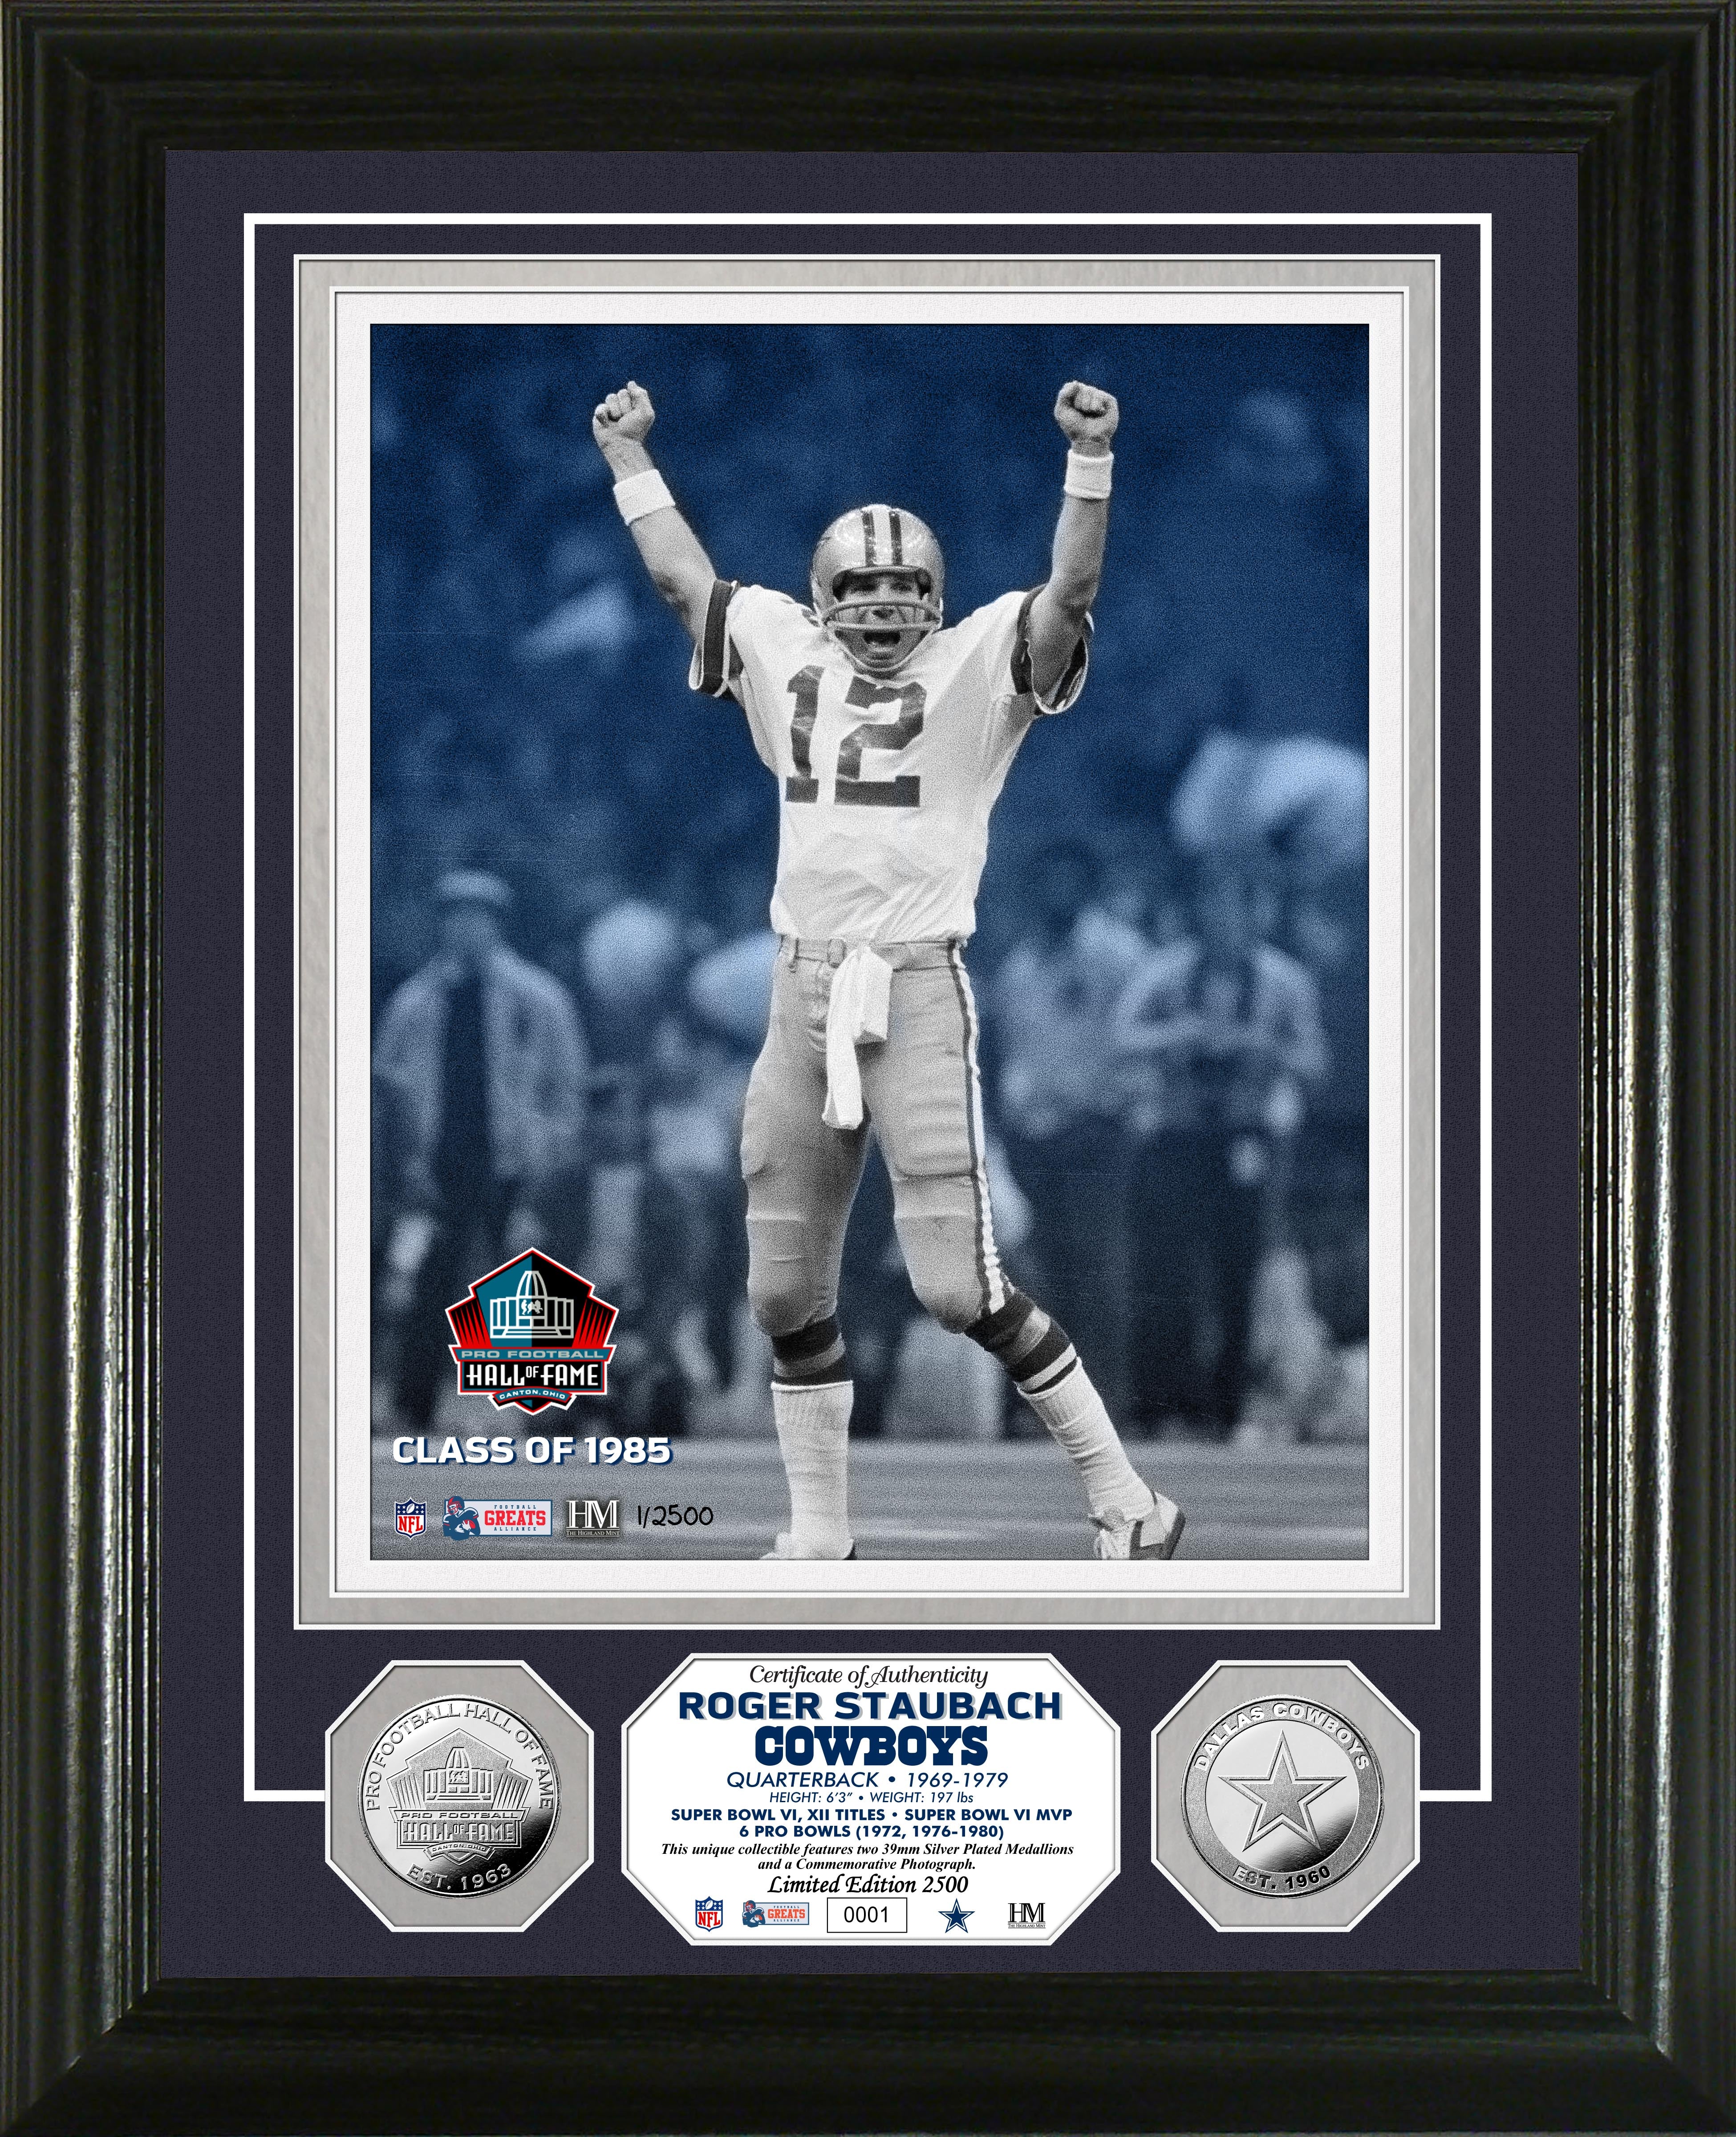 Roger Staubach Pro Football Hall of Fame Silver Coin Photo Mint